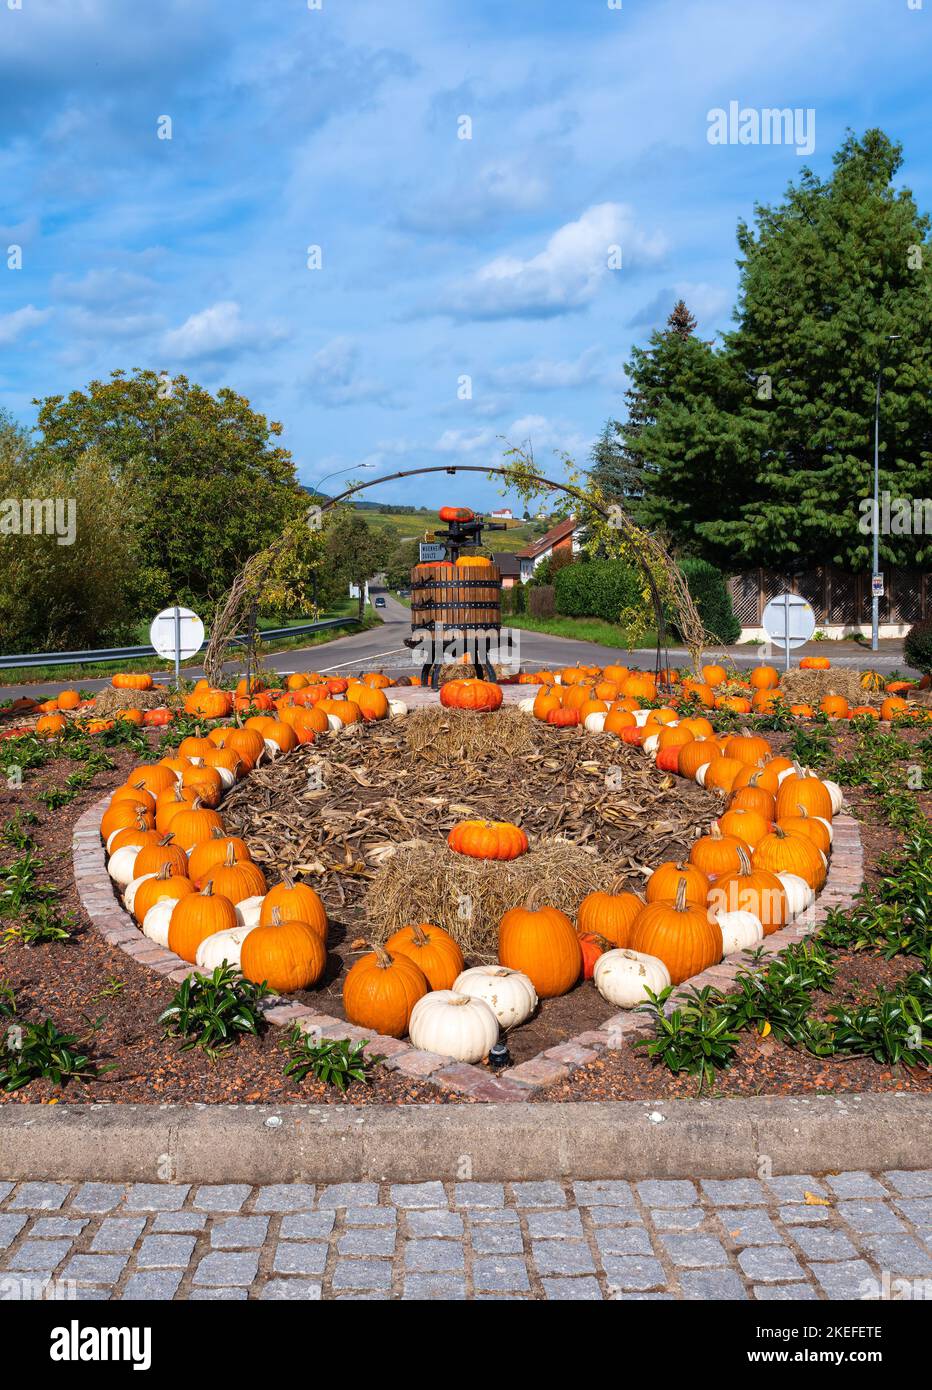 Hartmannswiller, France - October 10, 2022: A roundabout decoration in Hartmannswiller, Alsace, France, decorated with pumpkins and a grape press Stock Photo